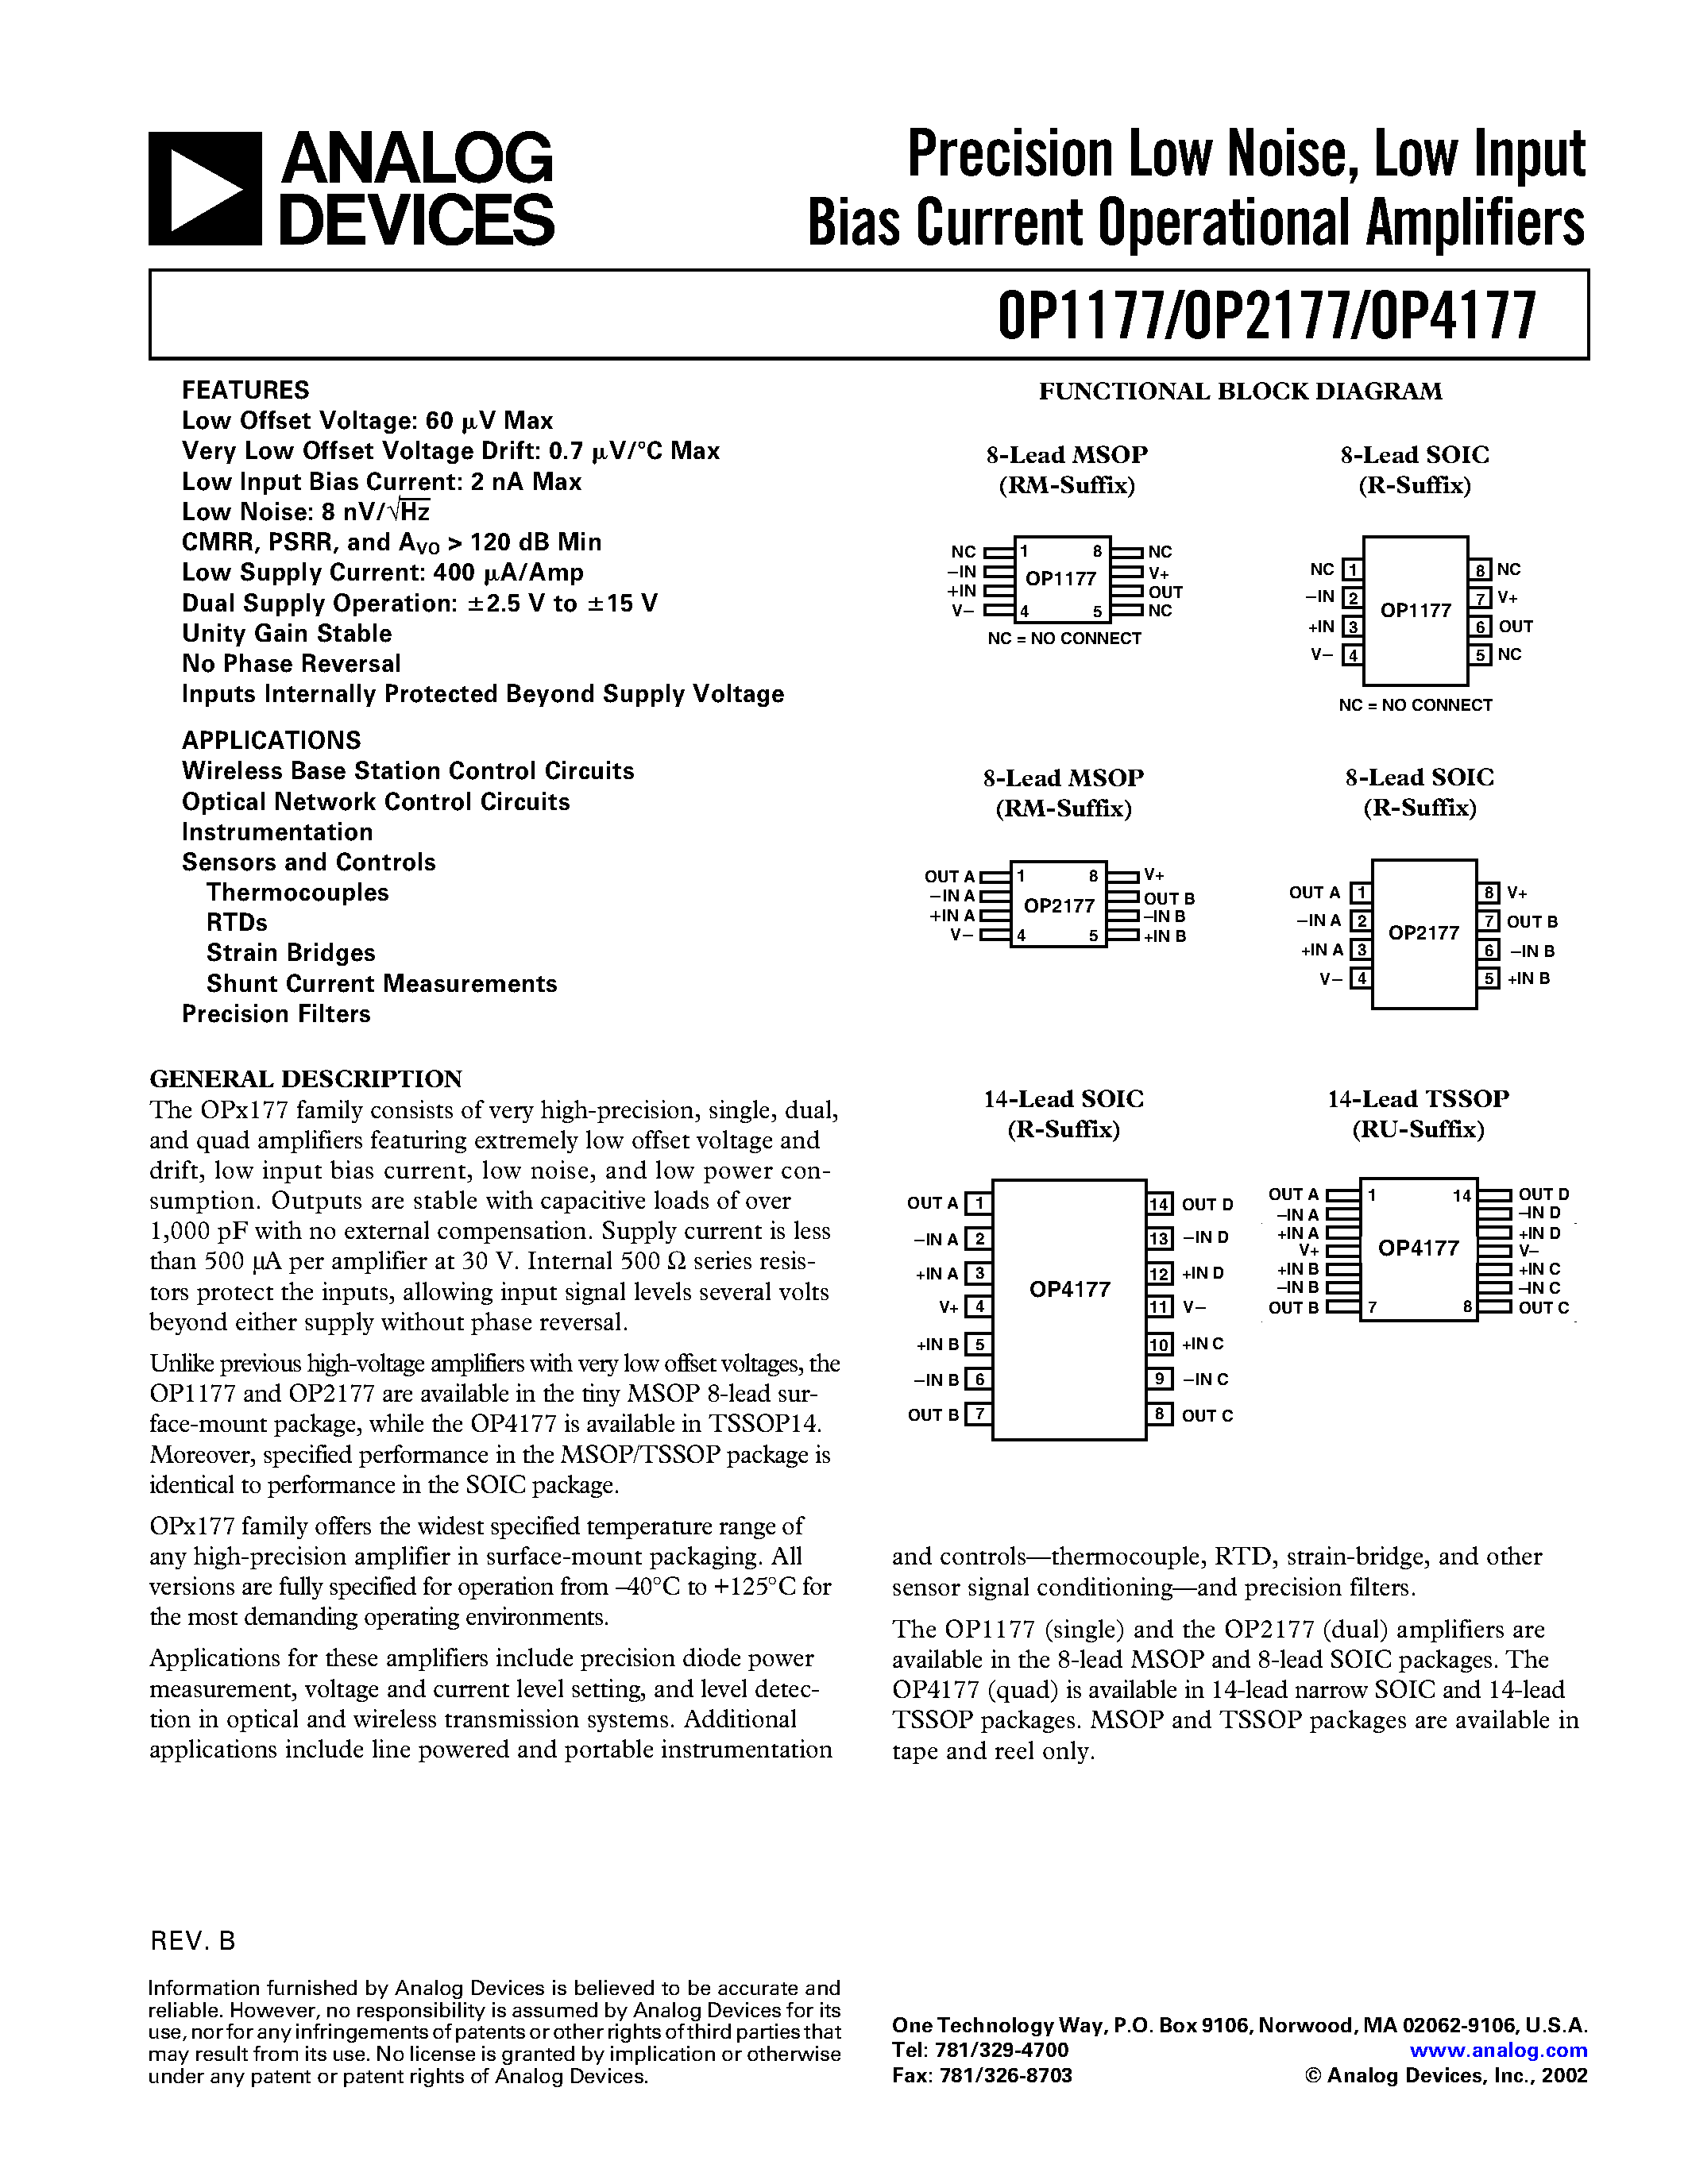 Datasheet OP1177 - Precision Low Noise / Low Input Bias Current Operational Amplifiers page 1